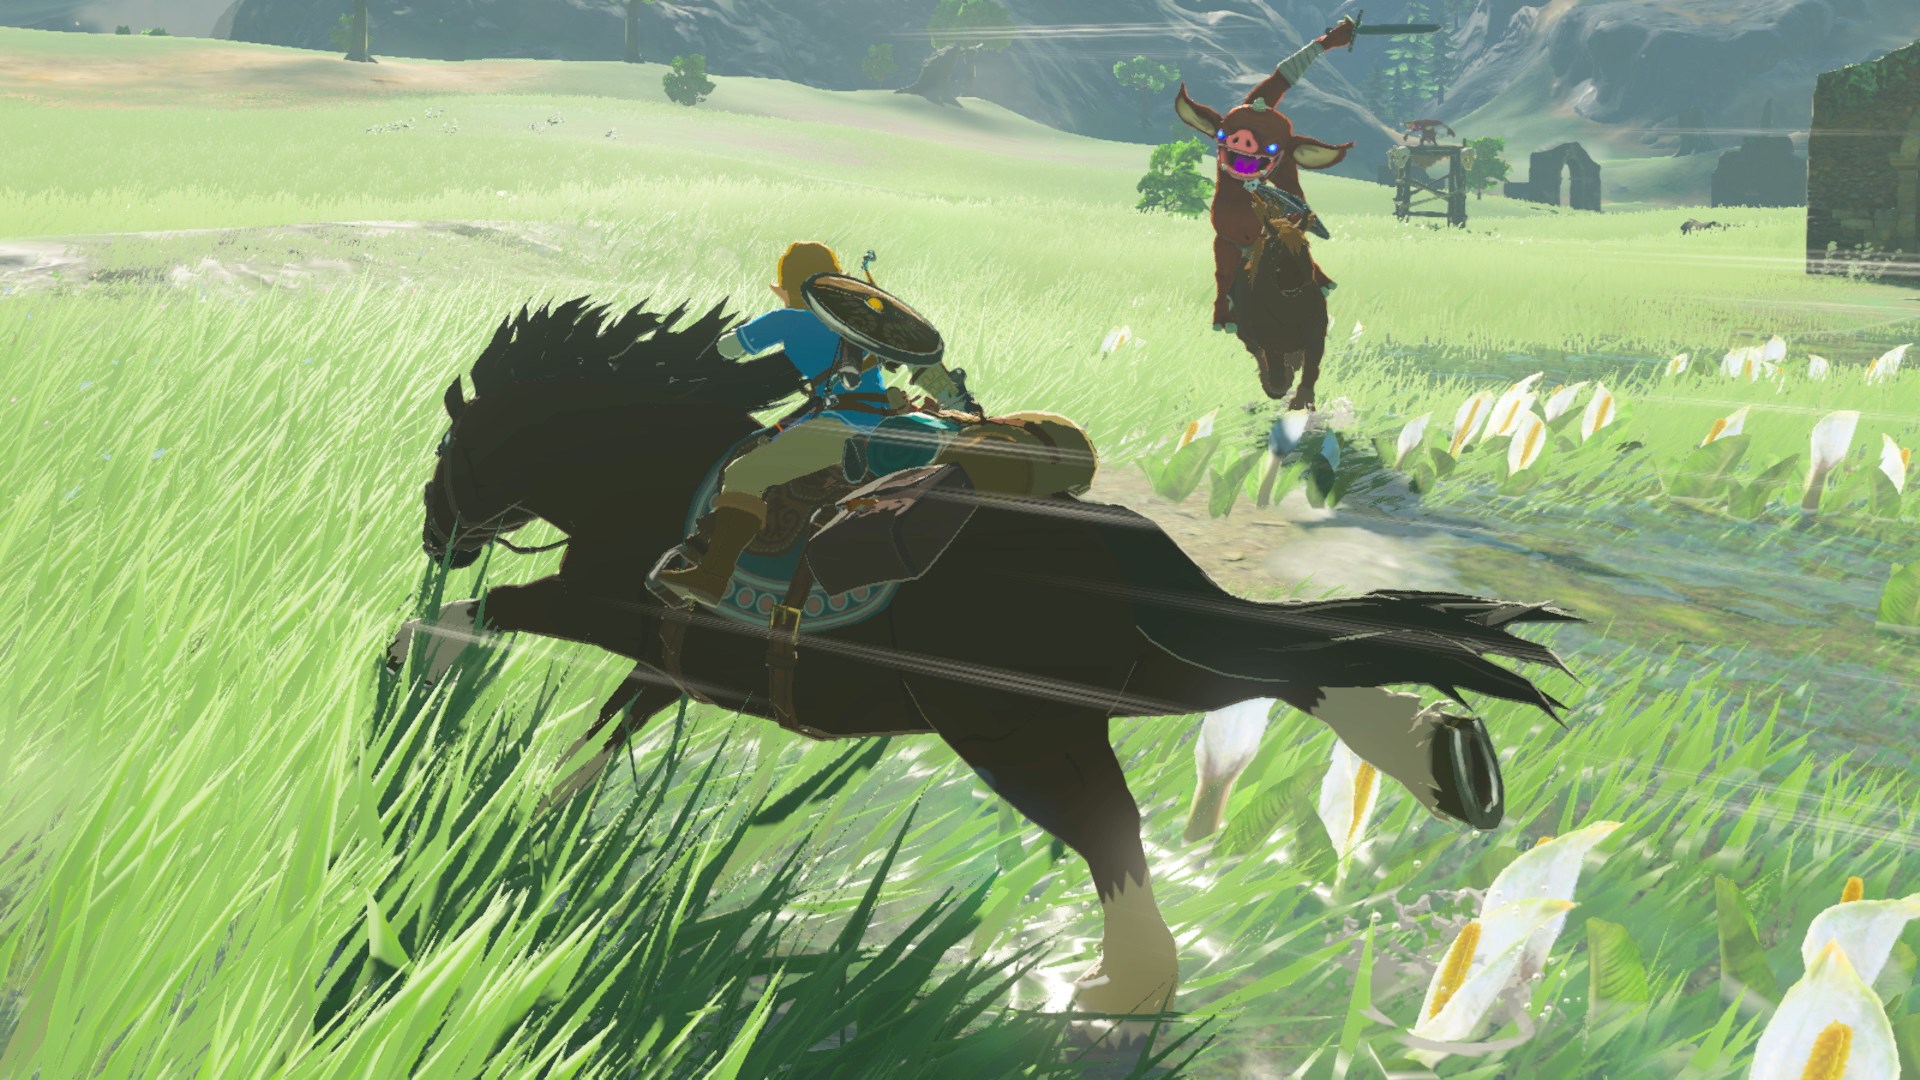 Link riding a horse in The Legend of Zelda: Breath of the Wild, as a Bokoblin approaches brandishing a club.